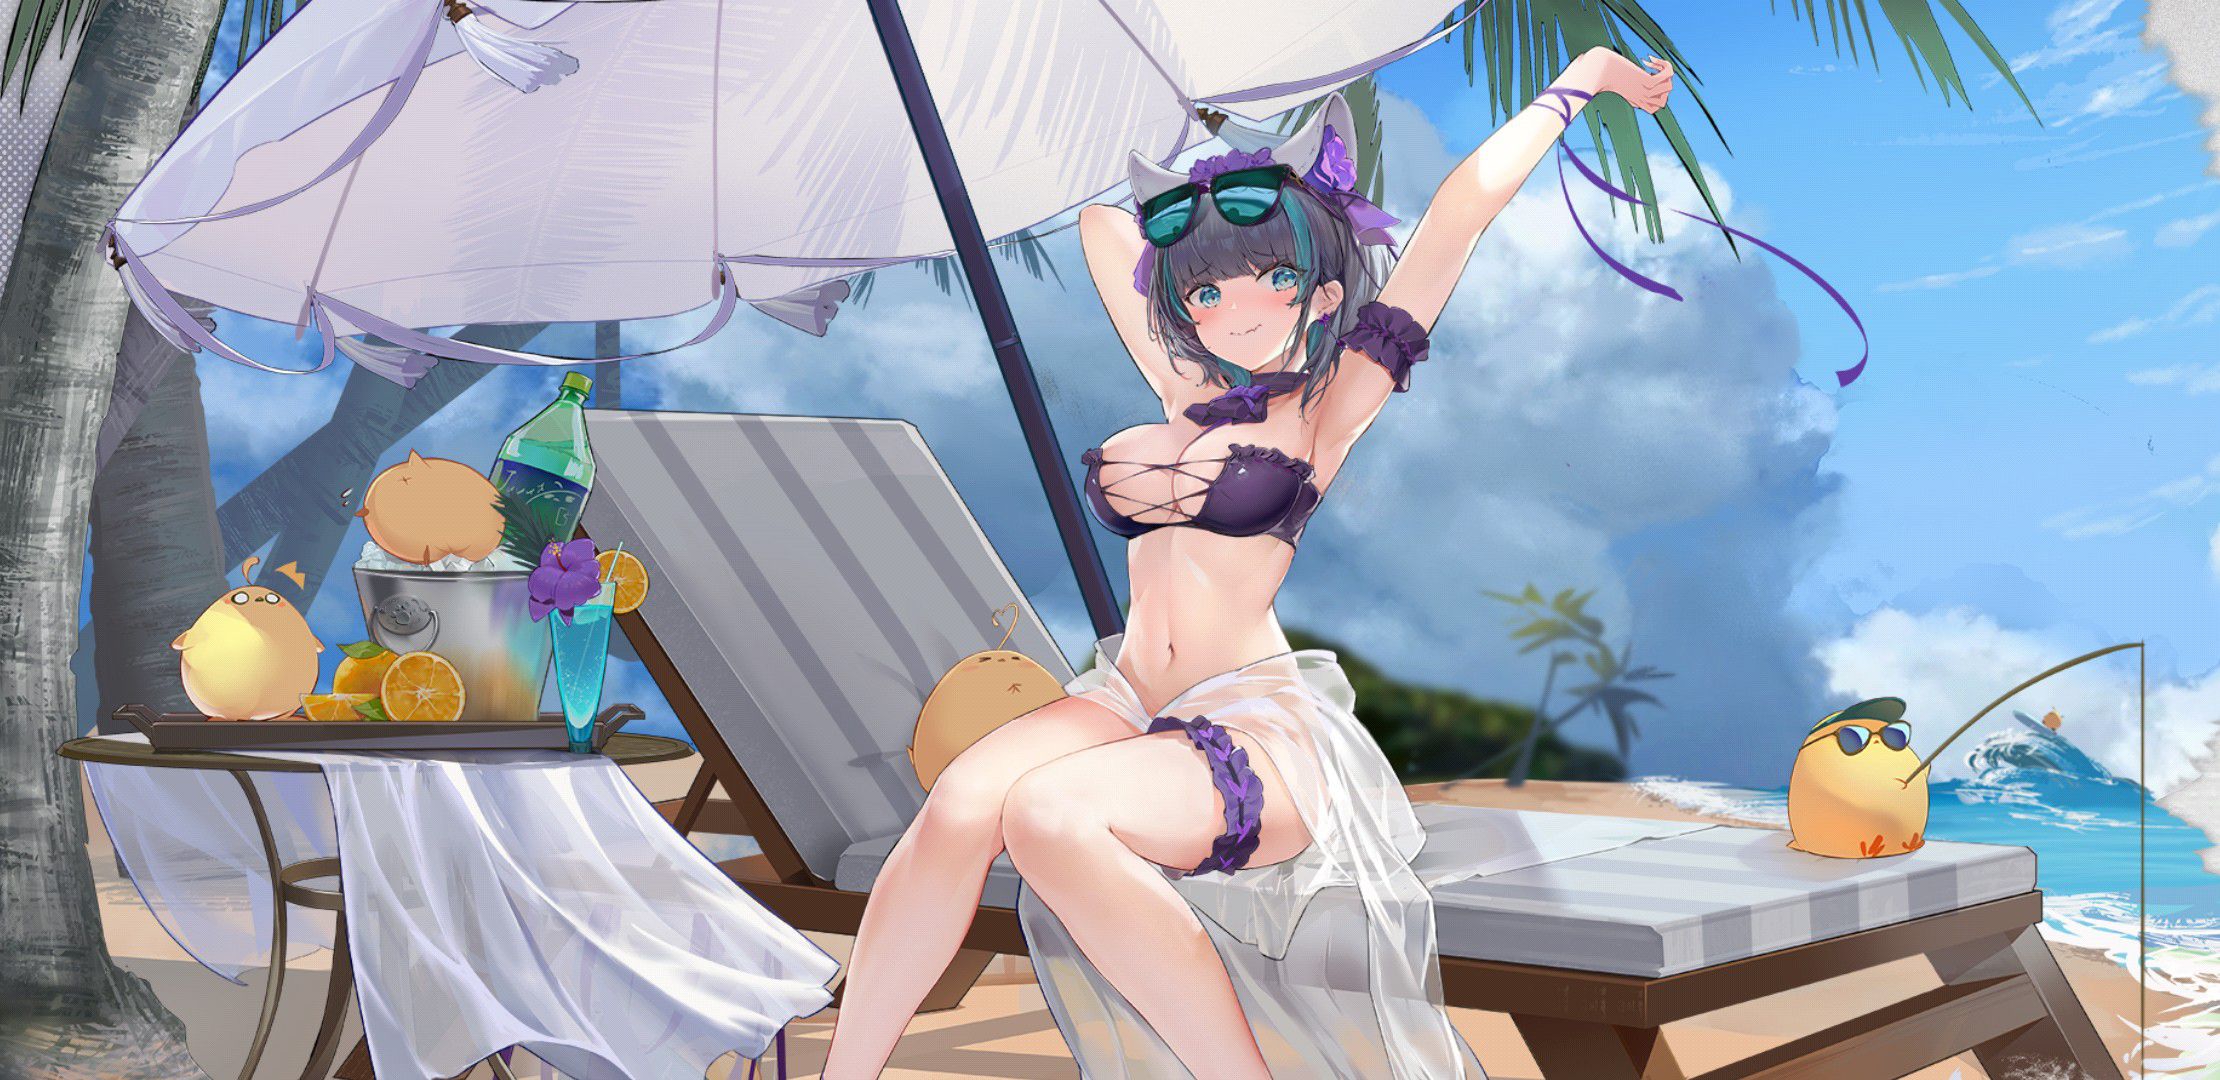 【There is an image】 Smartphone that urges charging with erotic swimsuits is malicious 45